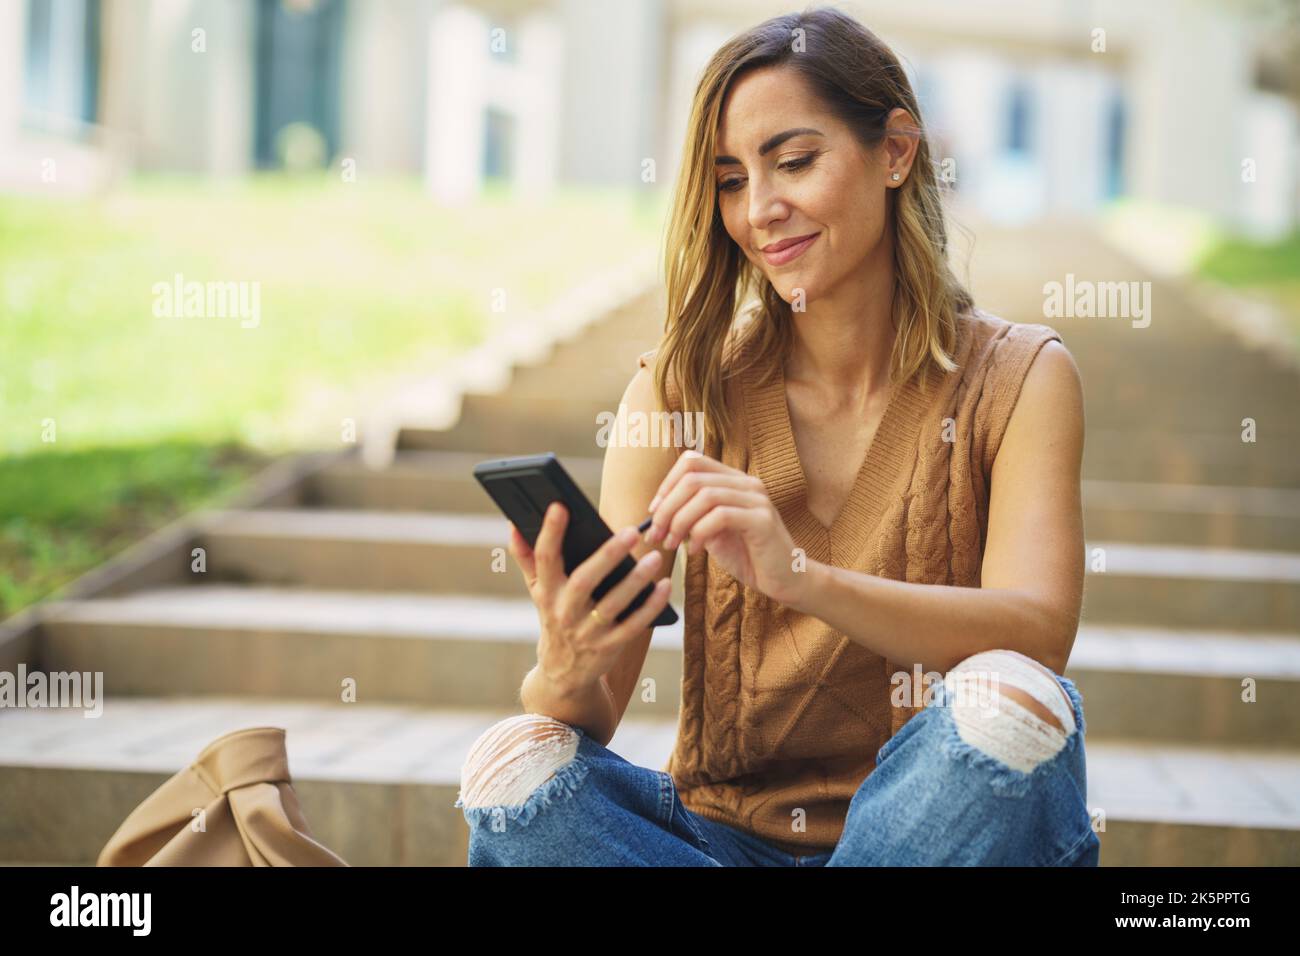 Middle aged using her smartphone with a pen or stylus, outdoor. Stock Photo